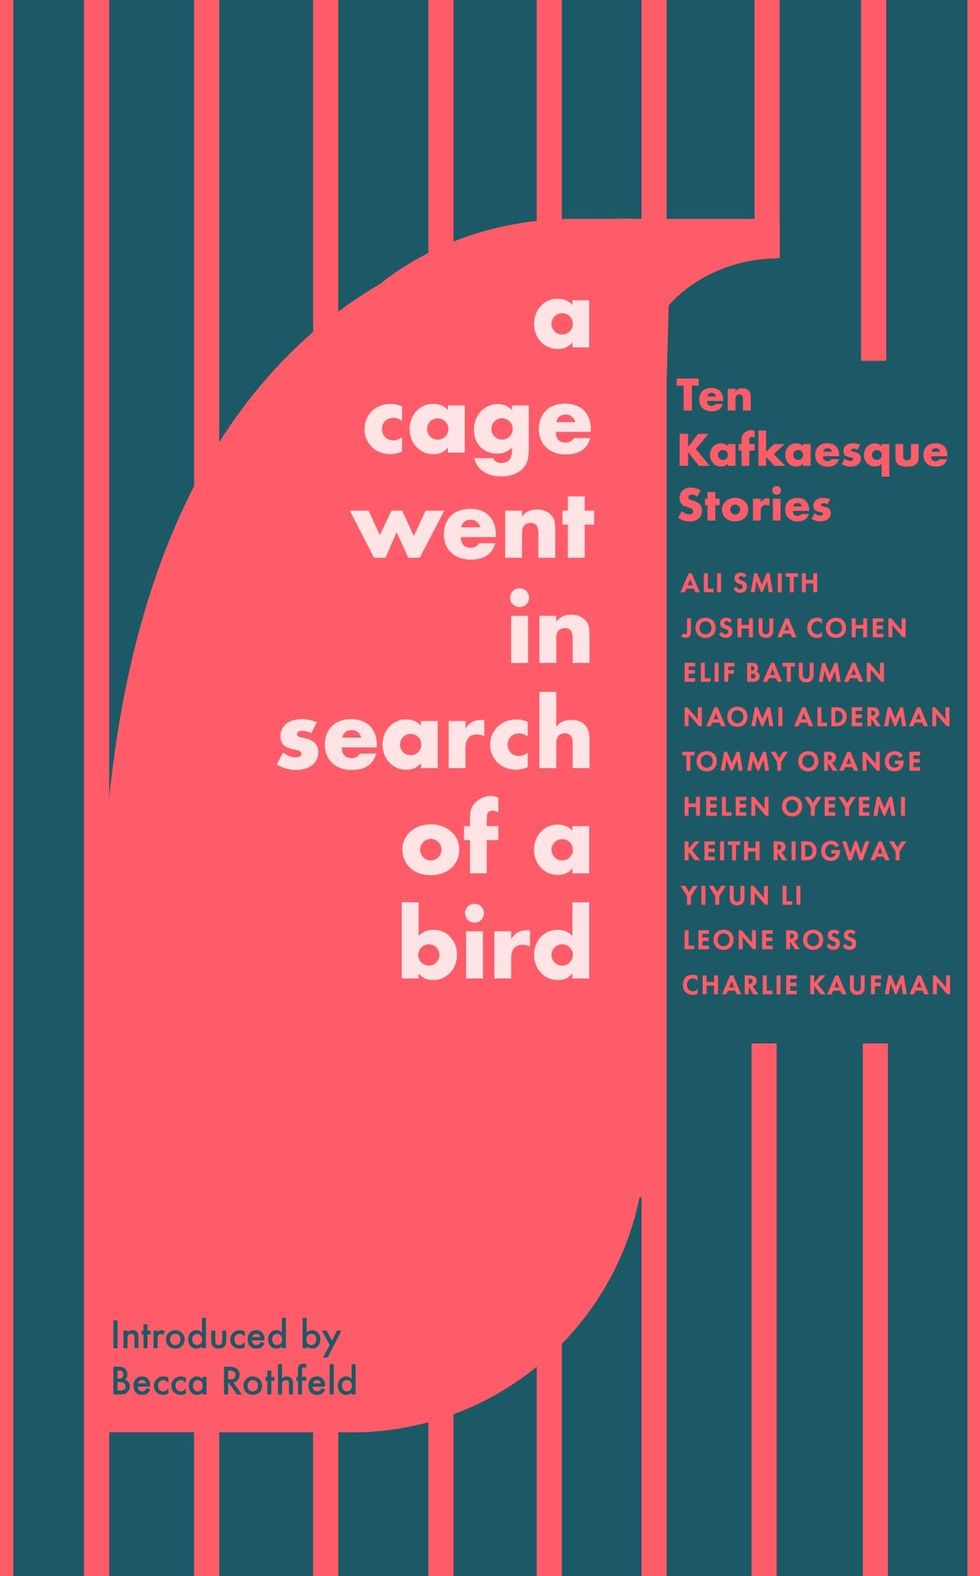 A Cage Went in Search of a Bird: Ten Kafkaesque Stories (30 May)